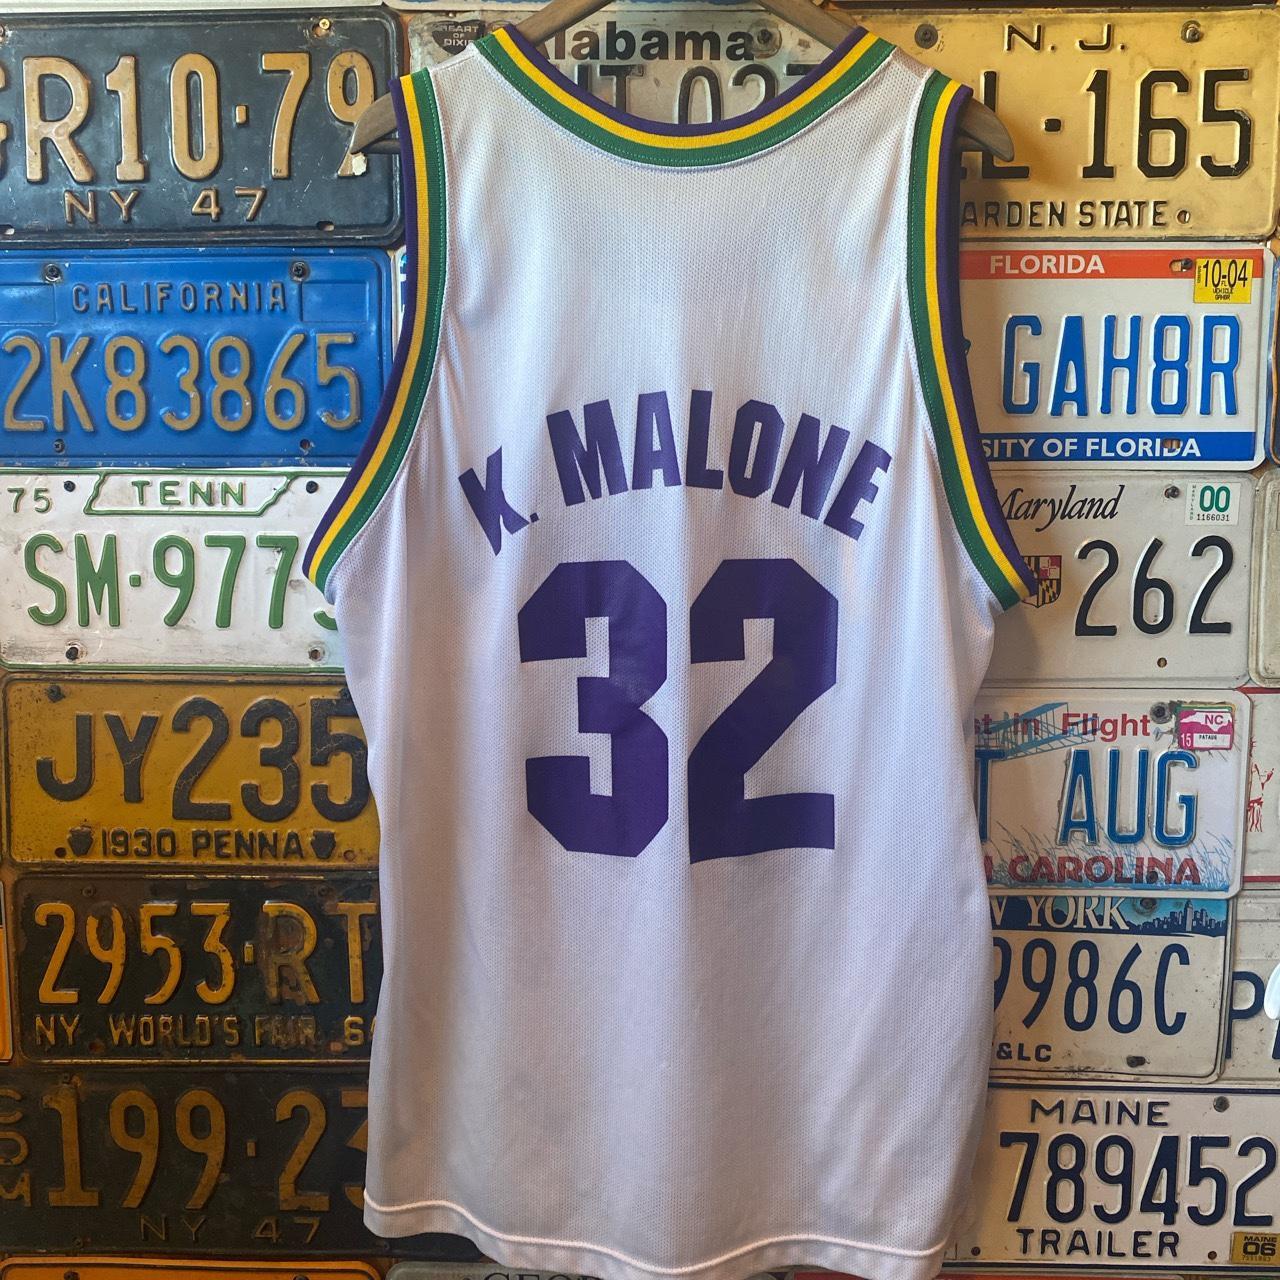 Los Angeles Lakers Karl Malone Jersey and shorts. - Depop